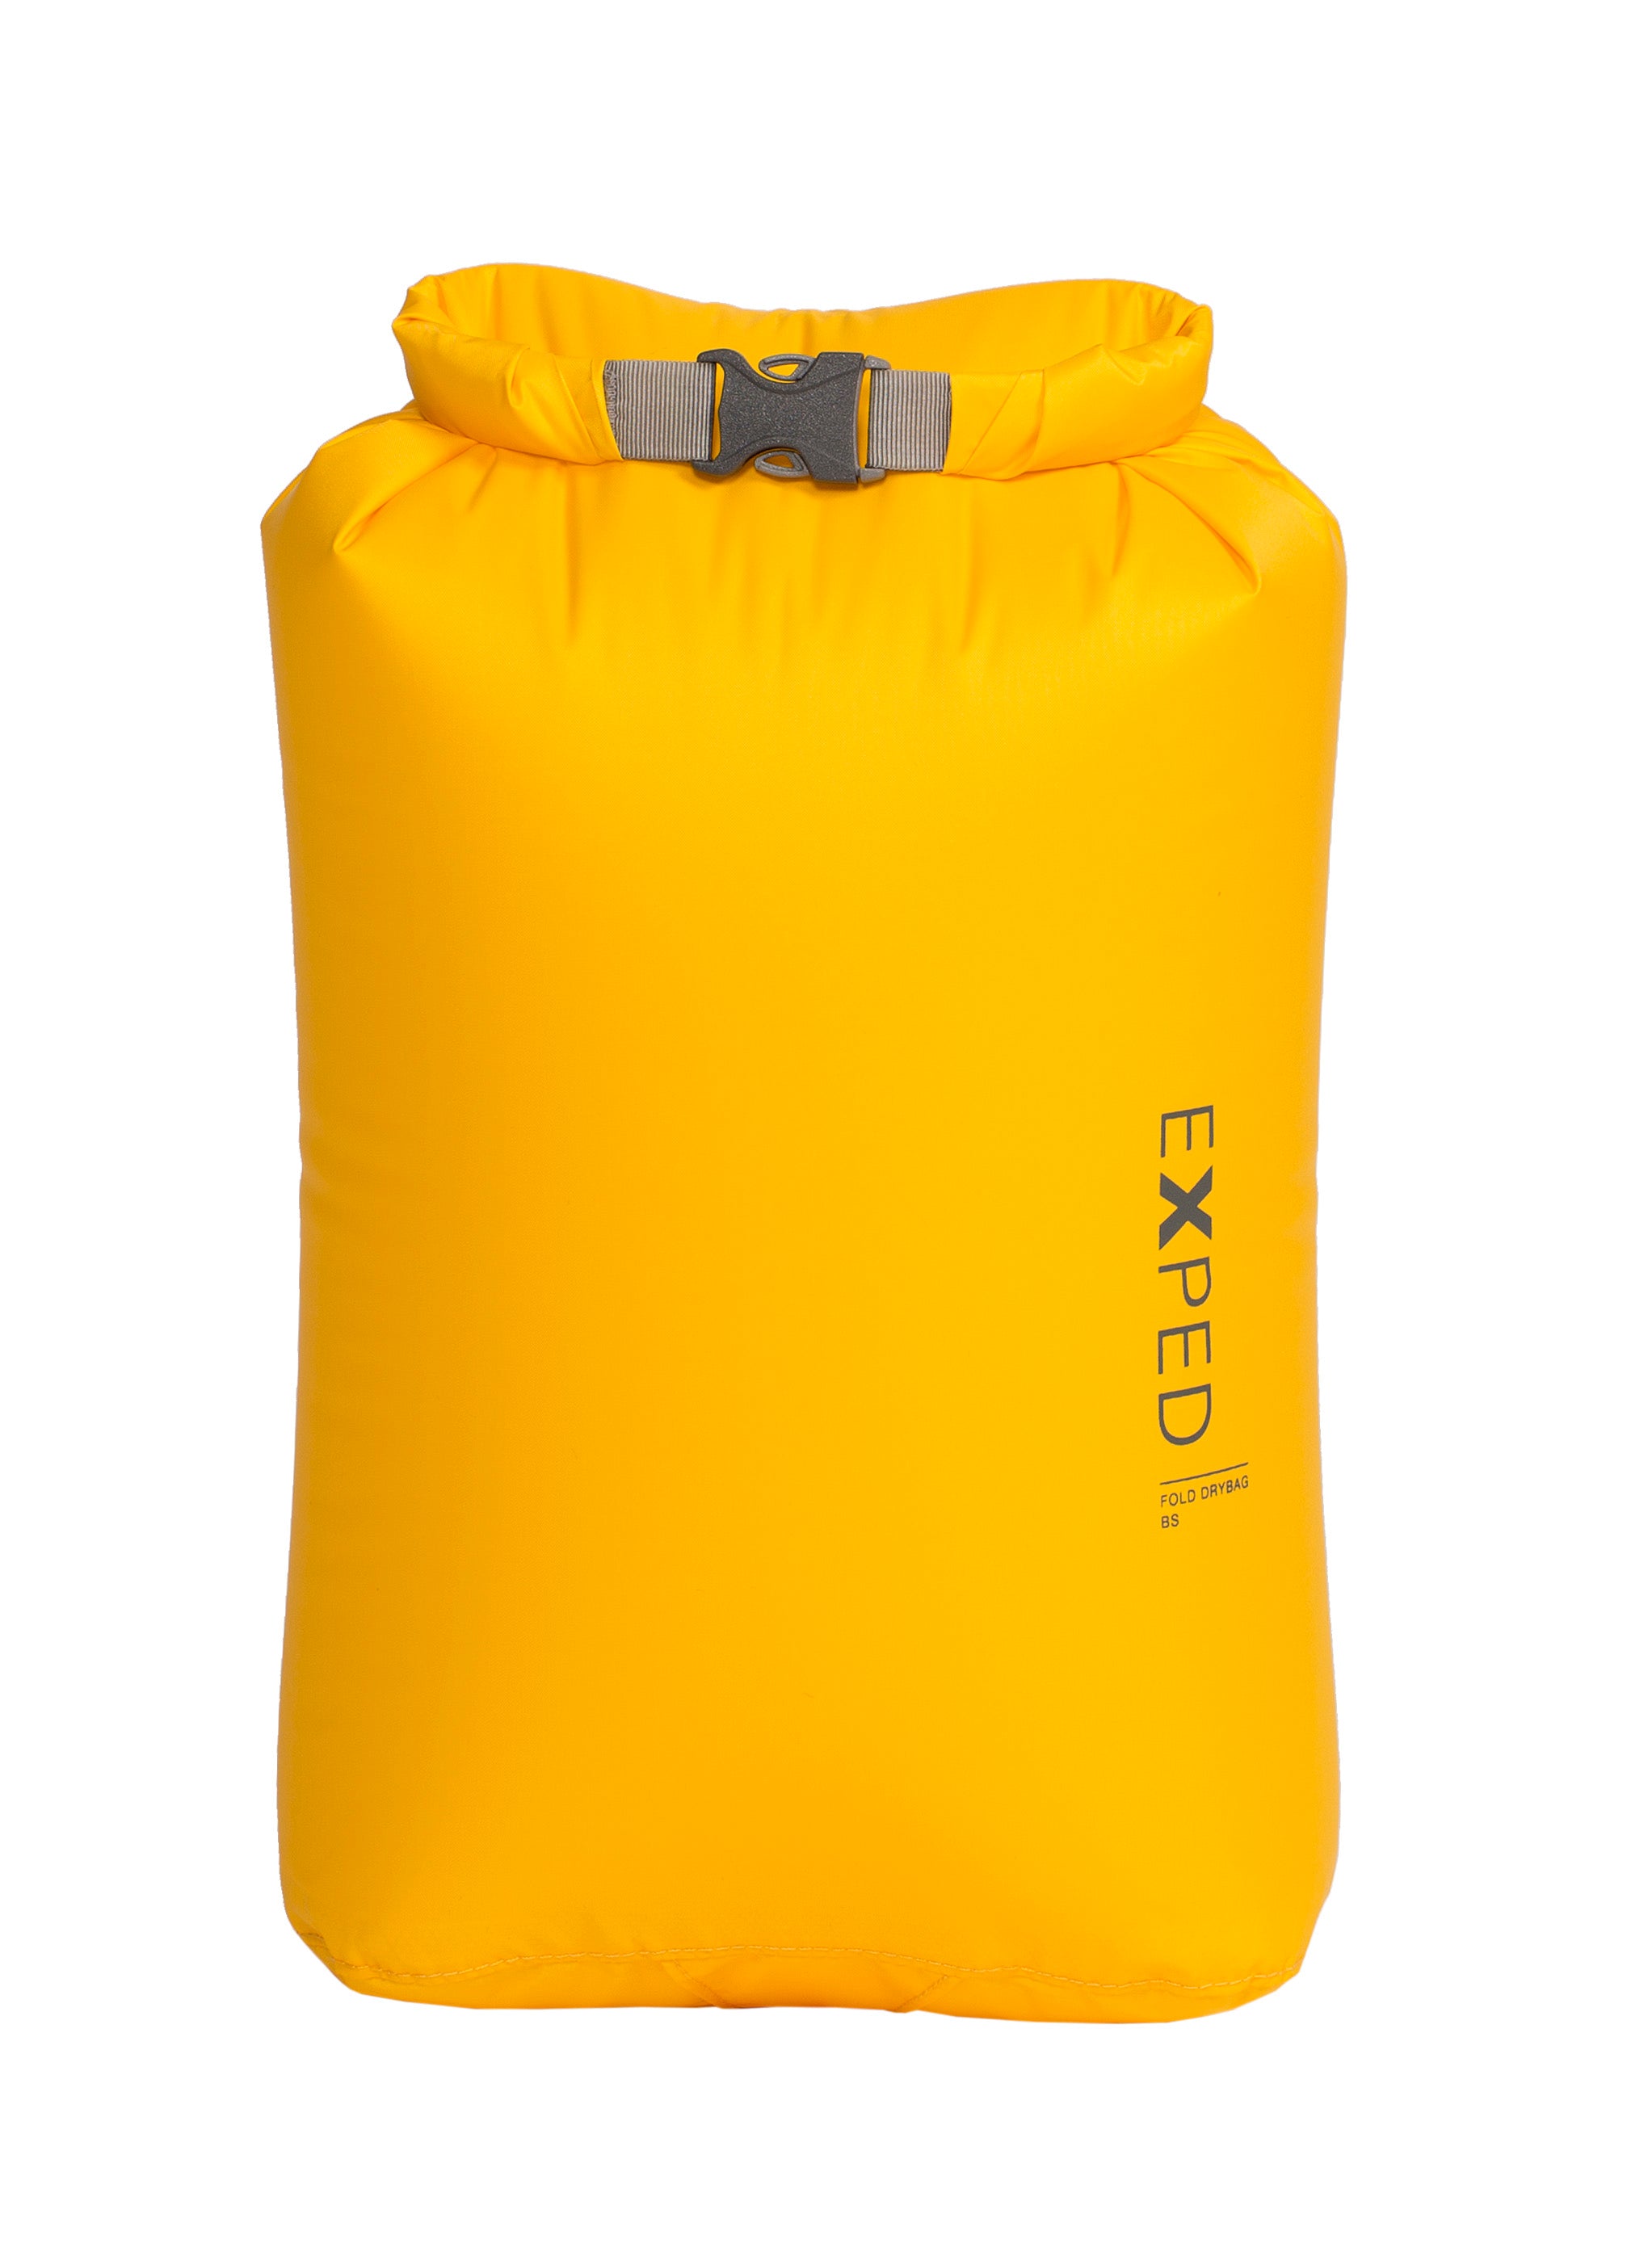 Exped roll-top dry bag L - Starless River